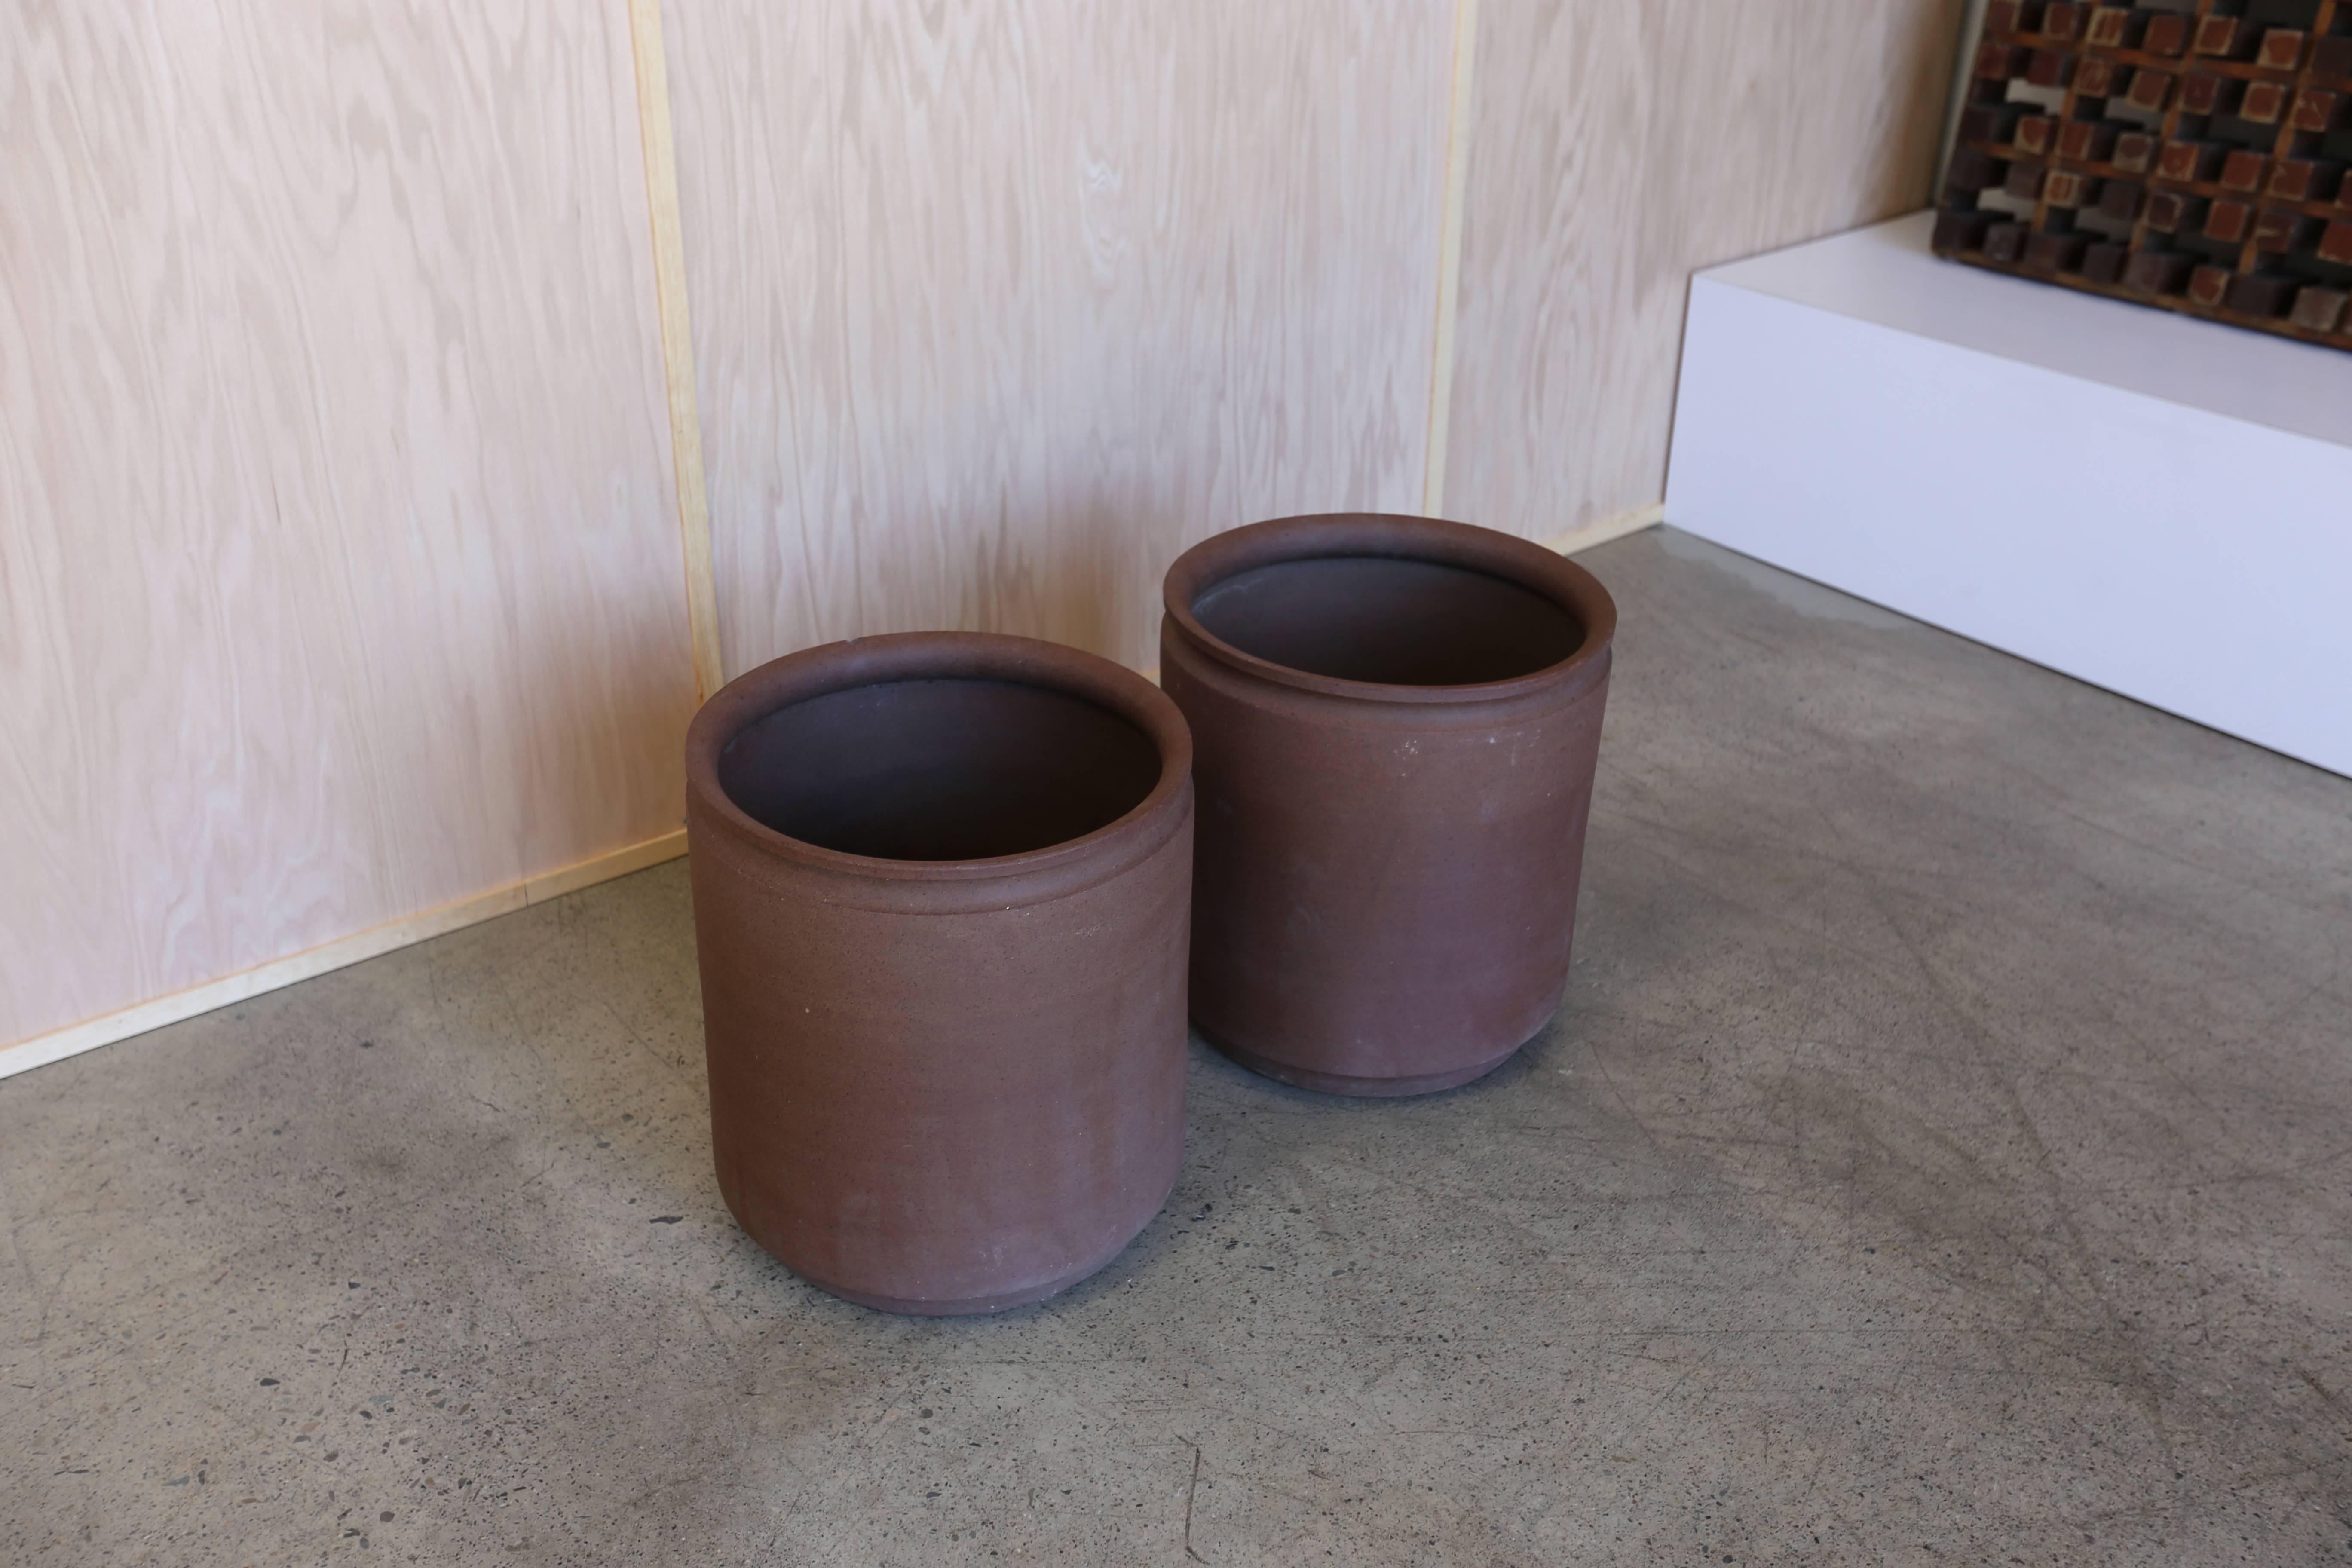 American Group of Three Ceramic Planters by David Cressey and Robert Maxwell